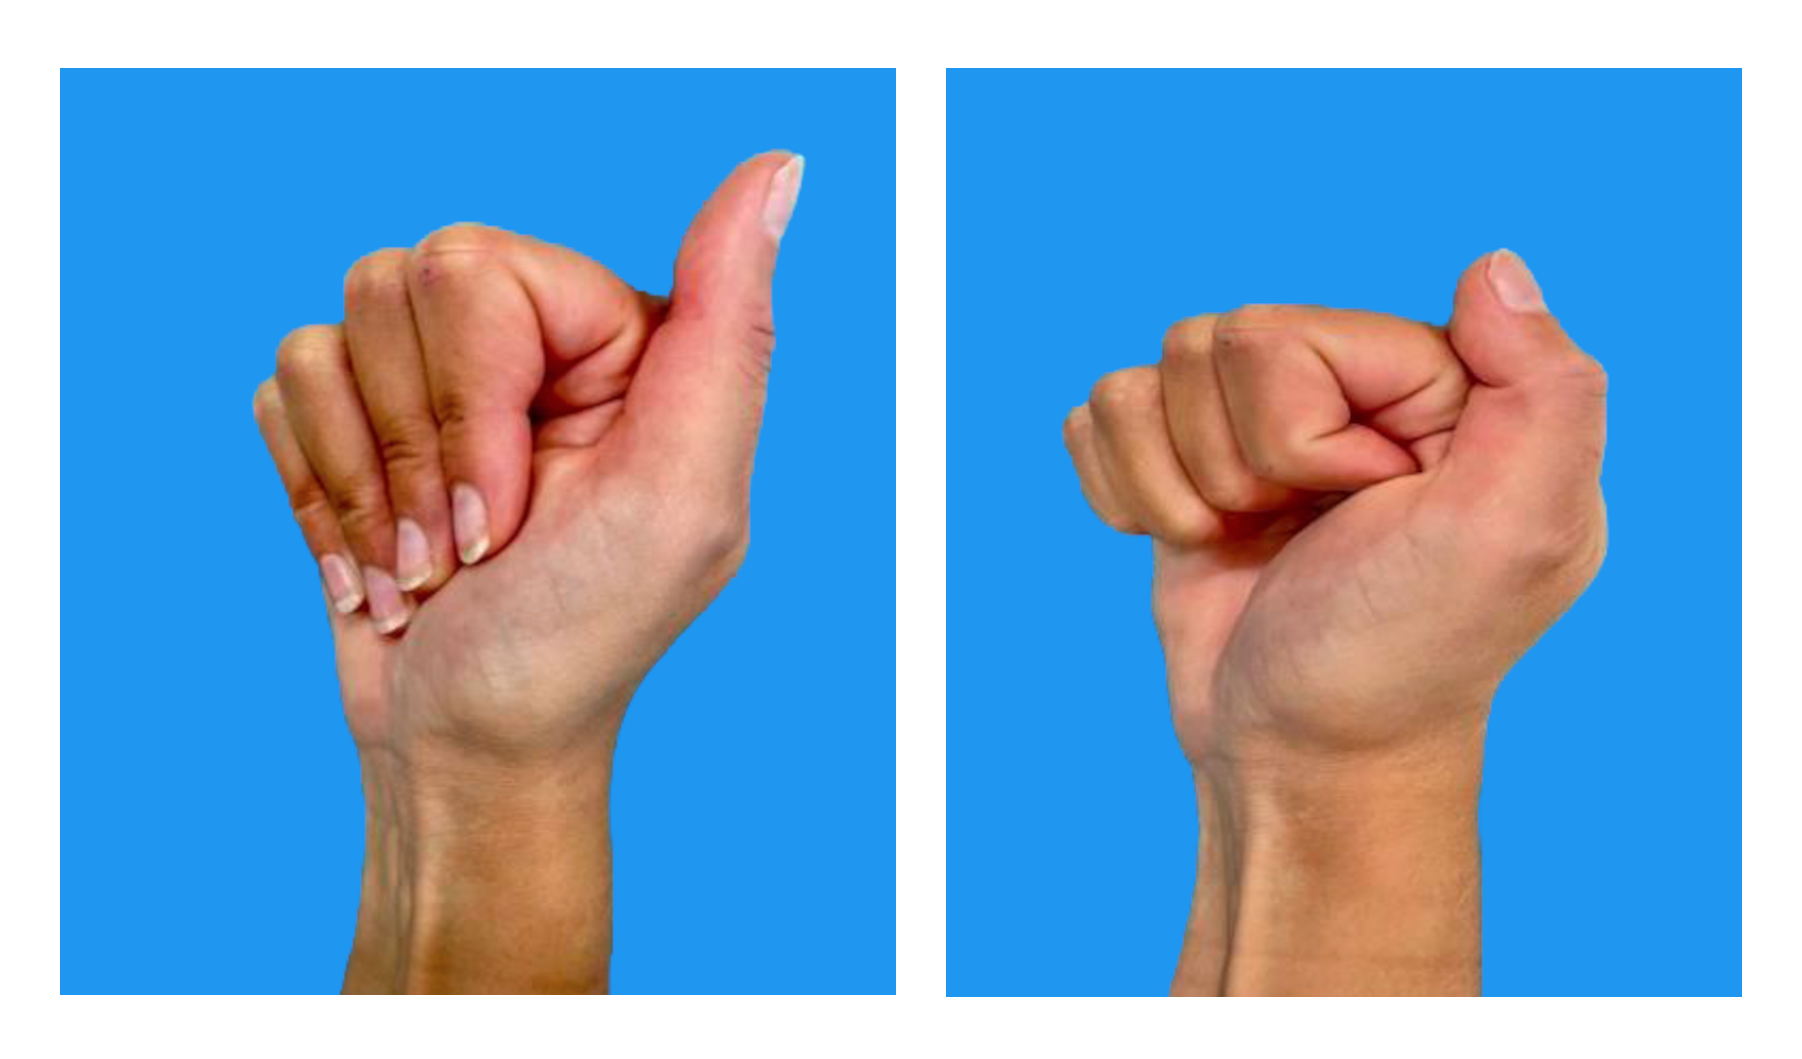 Fist exercise for hand surgery